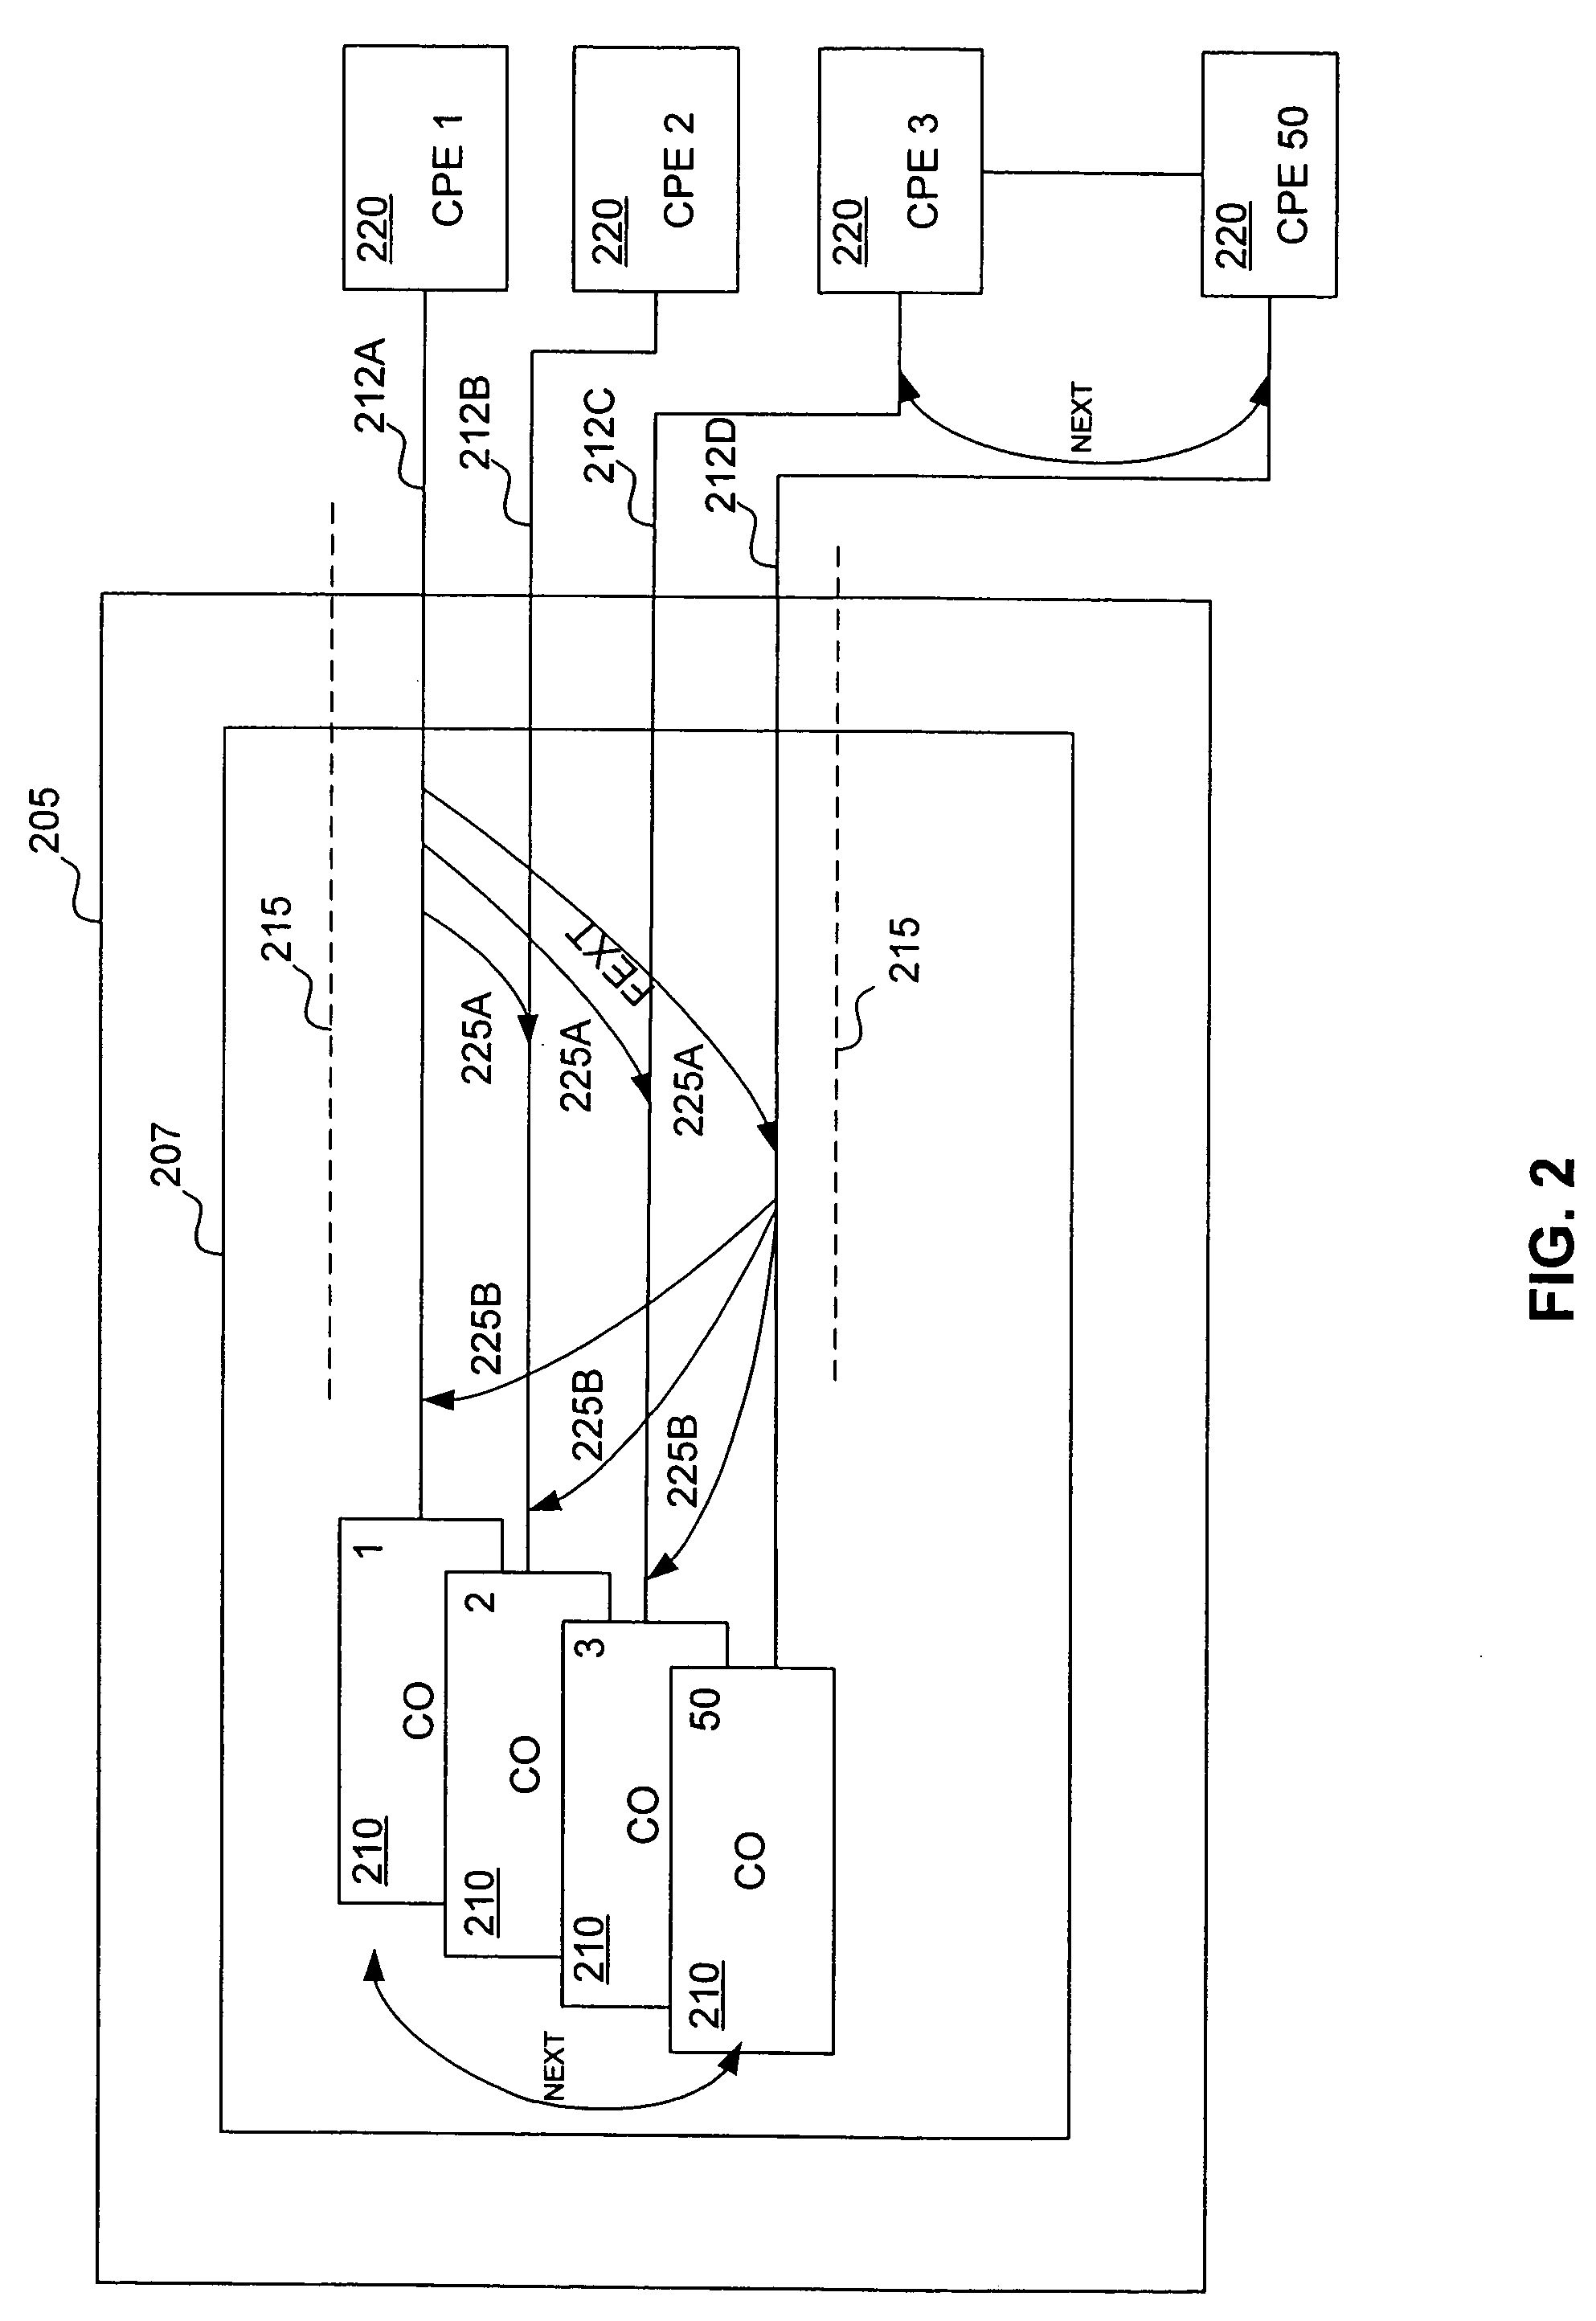 Method and system for reducing cross-talk and avoiding bridged taps